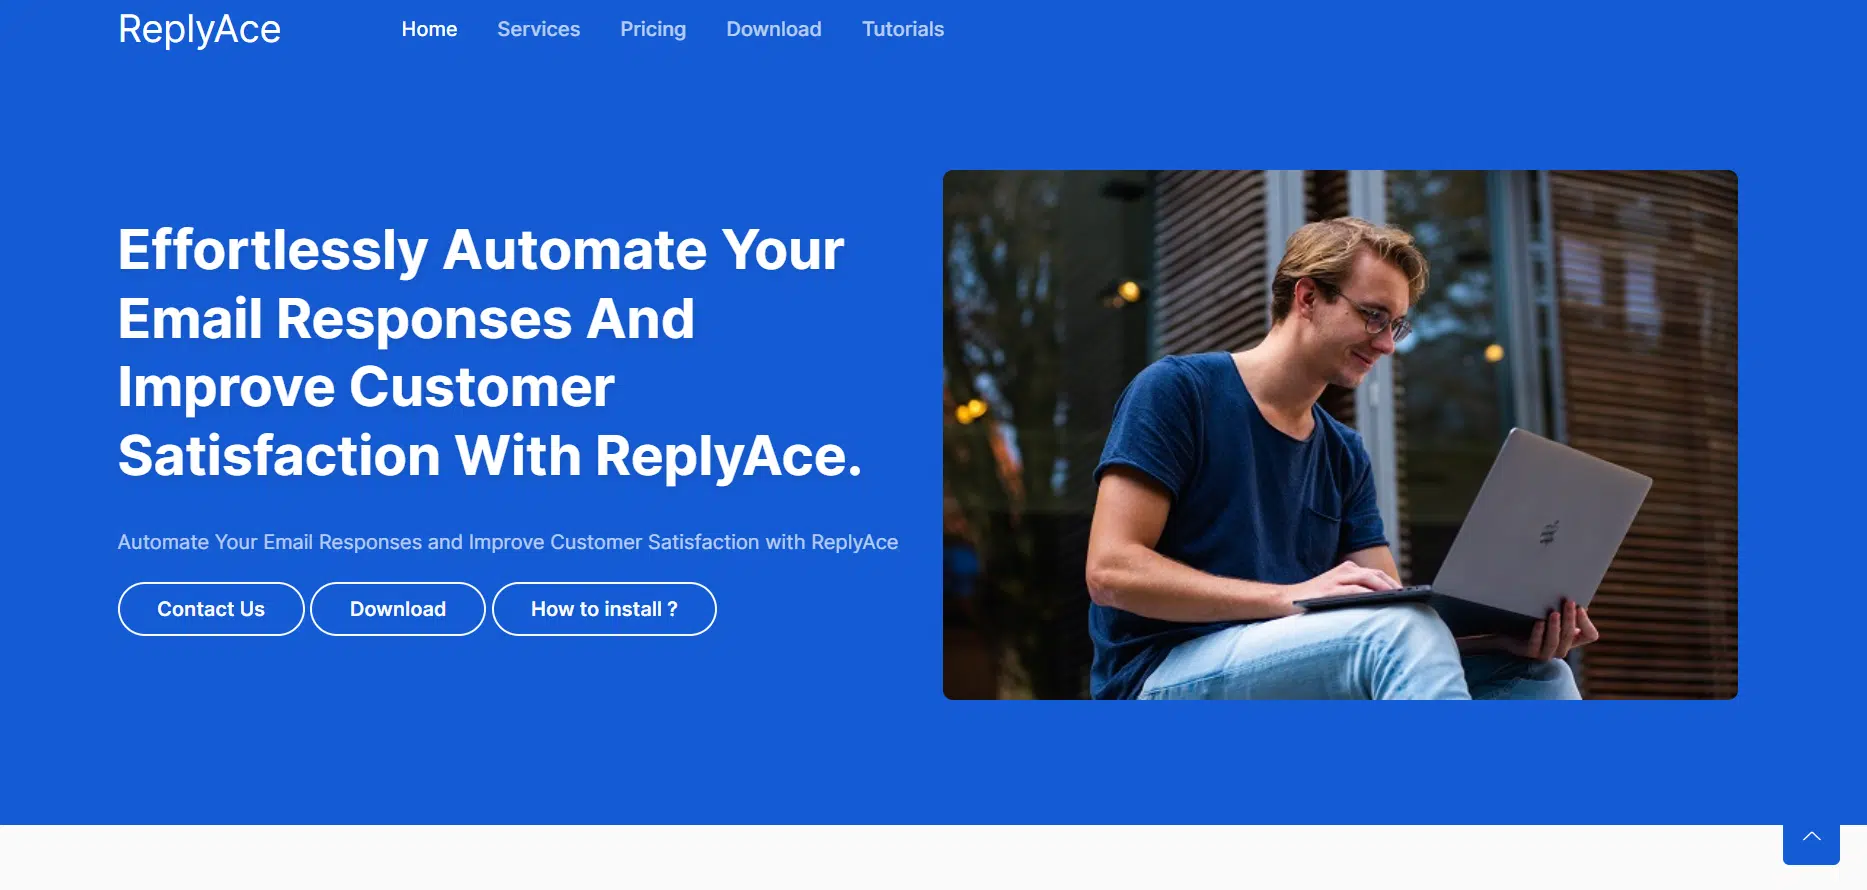 ReplyAce website picture